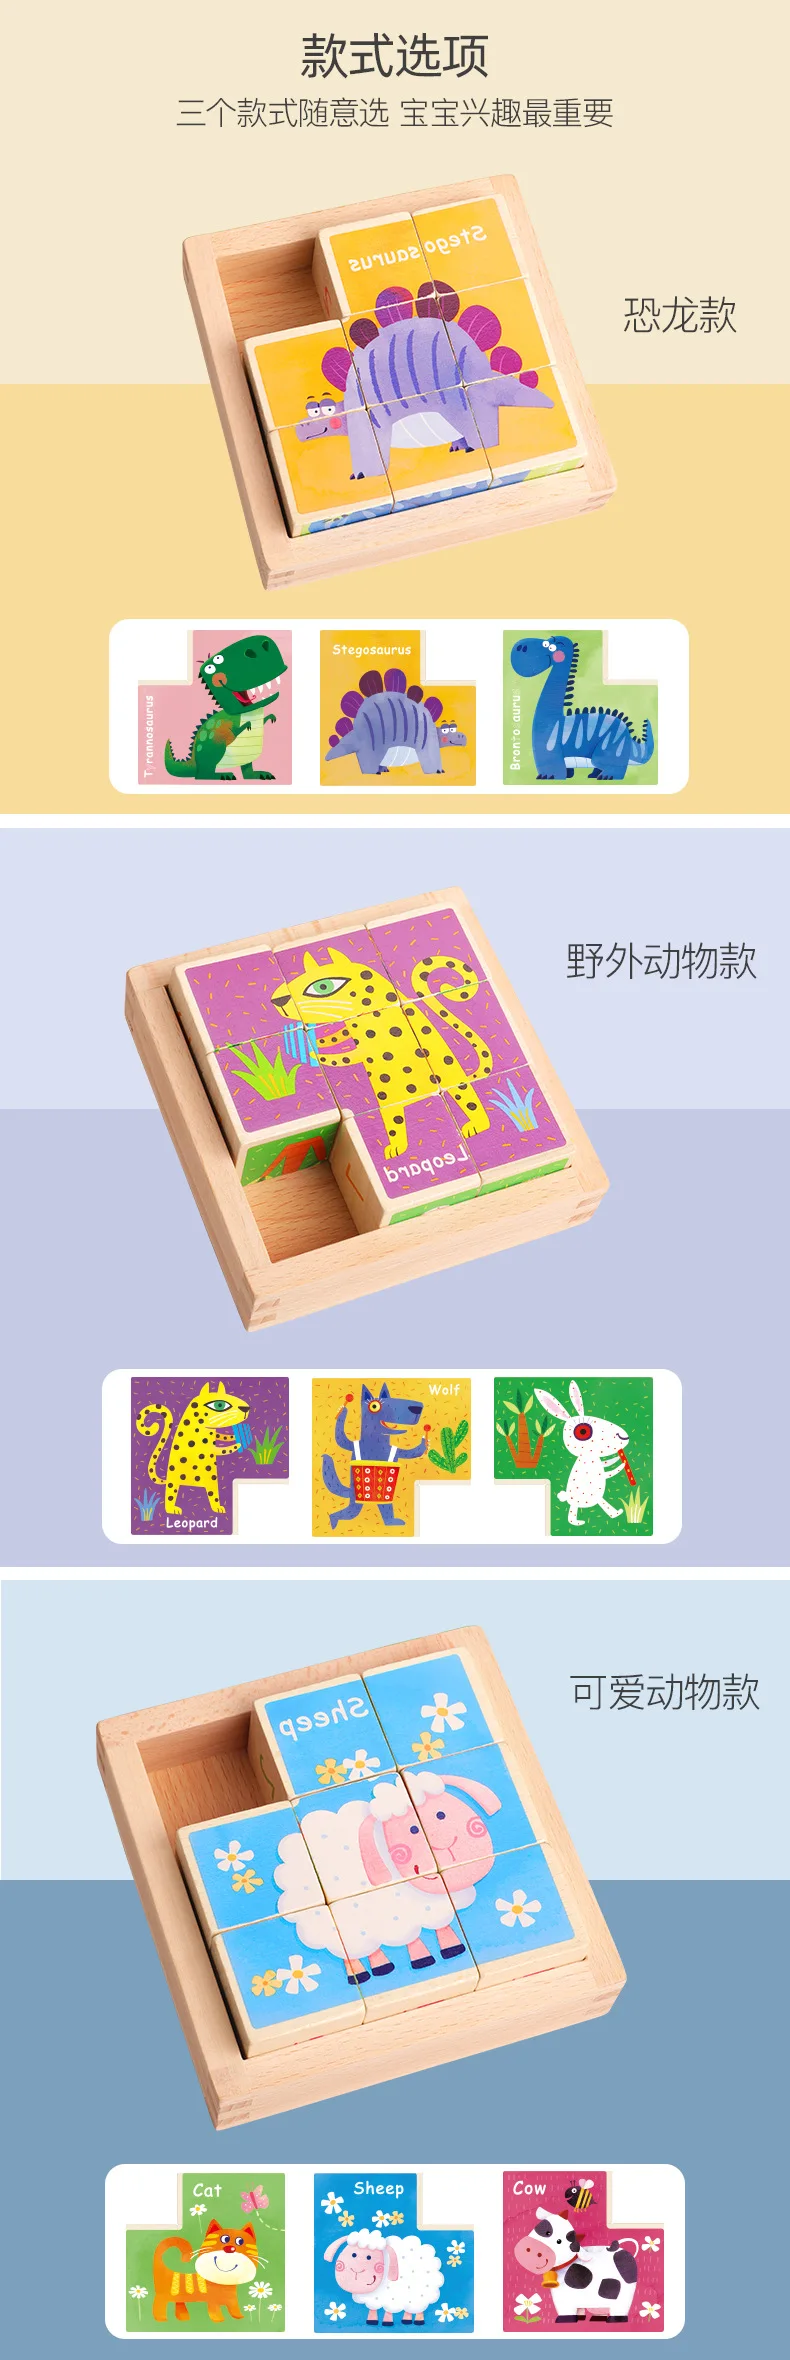 Wooden Blocks Cube Puzzles - Wooden Cube Jigsaw Puzzles 9 Wooden Cubes Blocks to Make 6  Animals Pictures in a Wooden Box